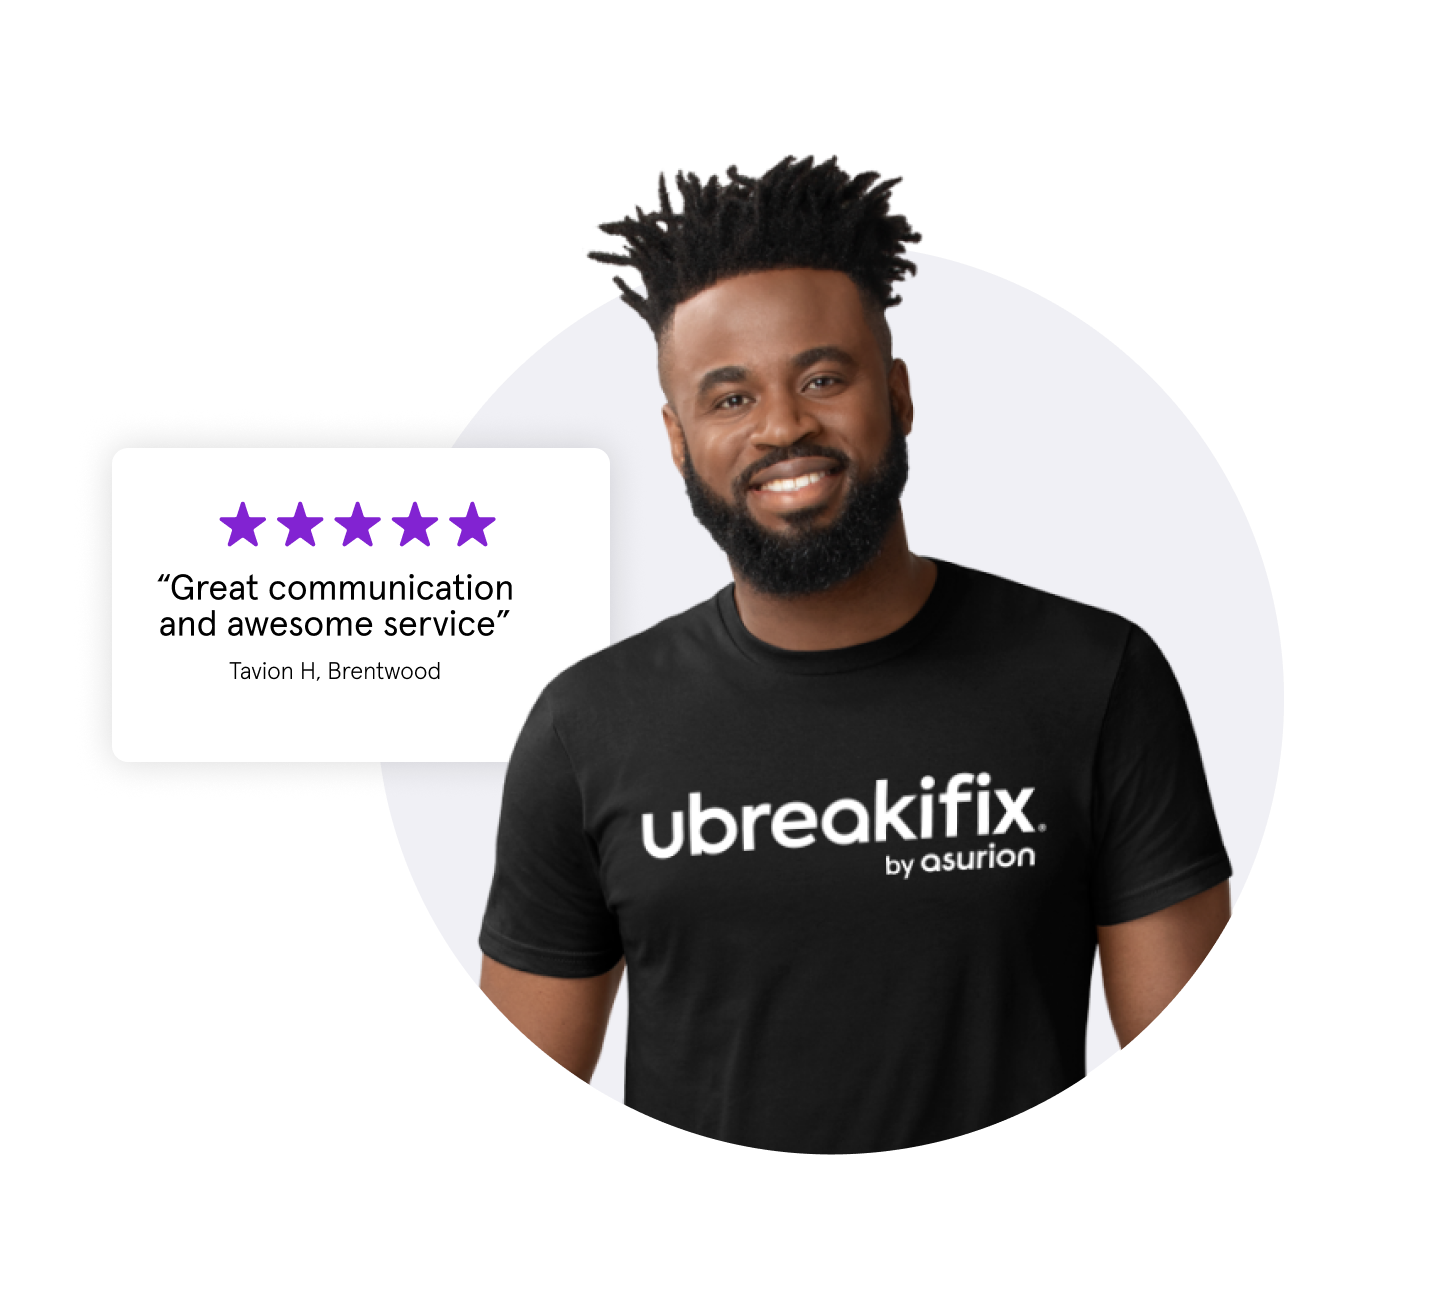 uBreakiFix by Asurion expert. 5 stars. Great communication and awesome service. Quote from Tavion H., Brentwood.